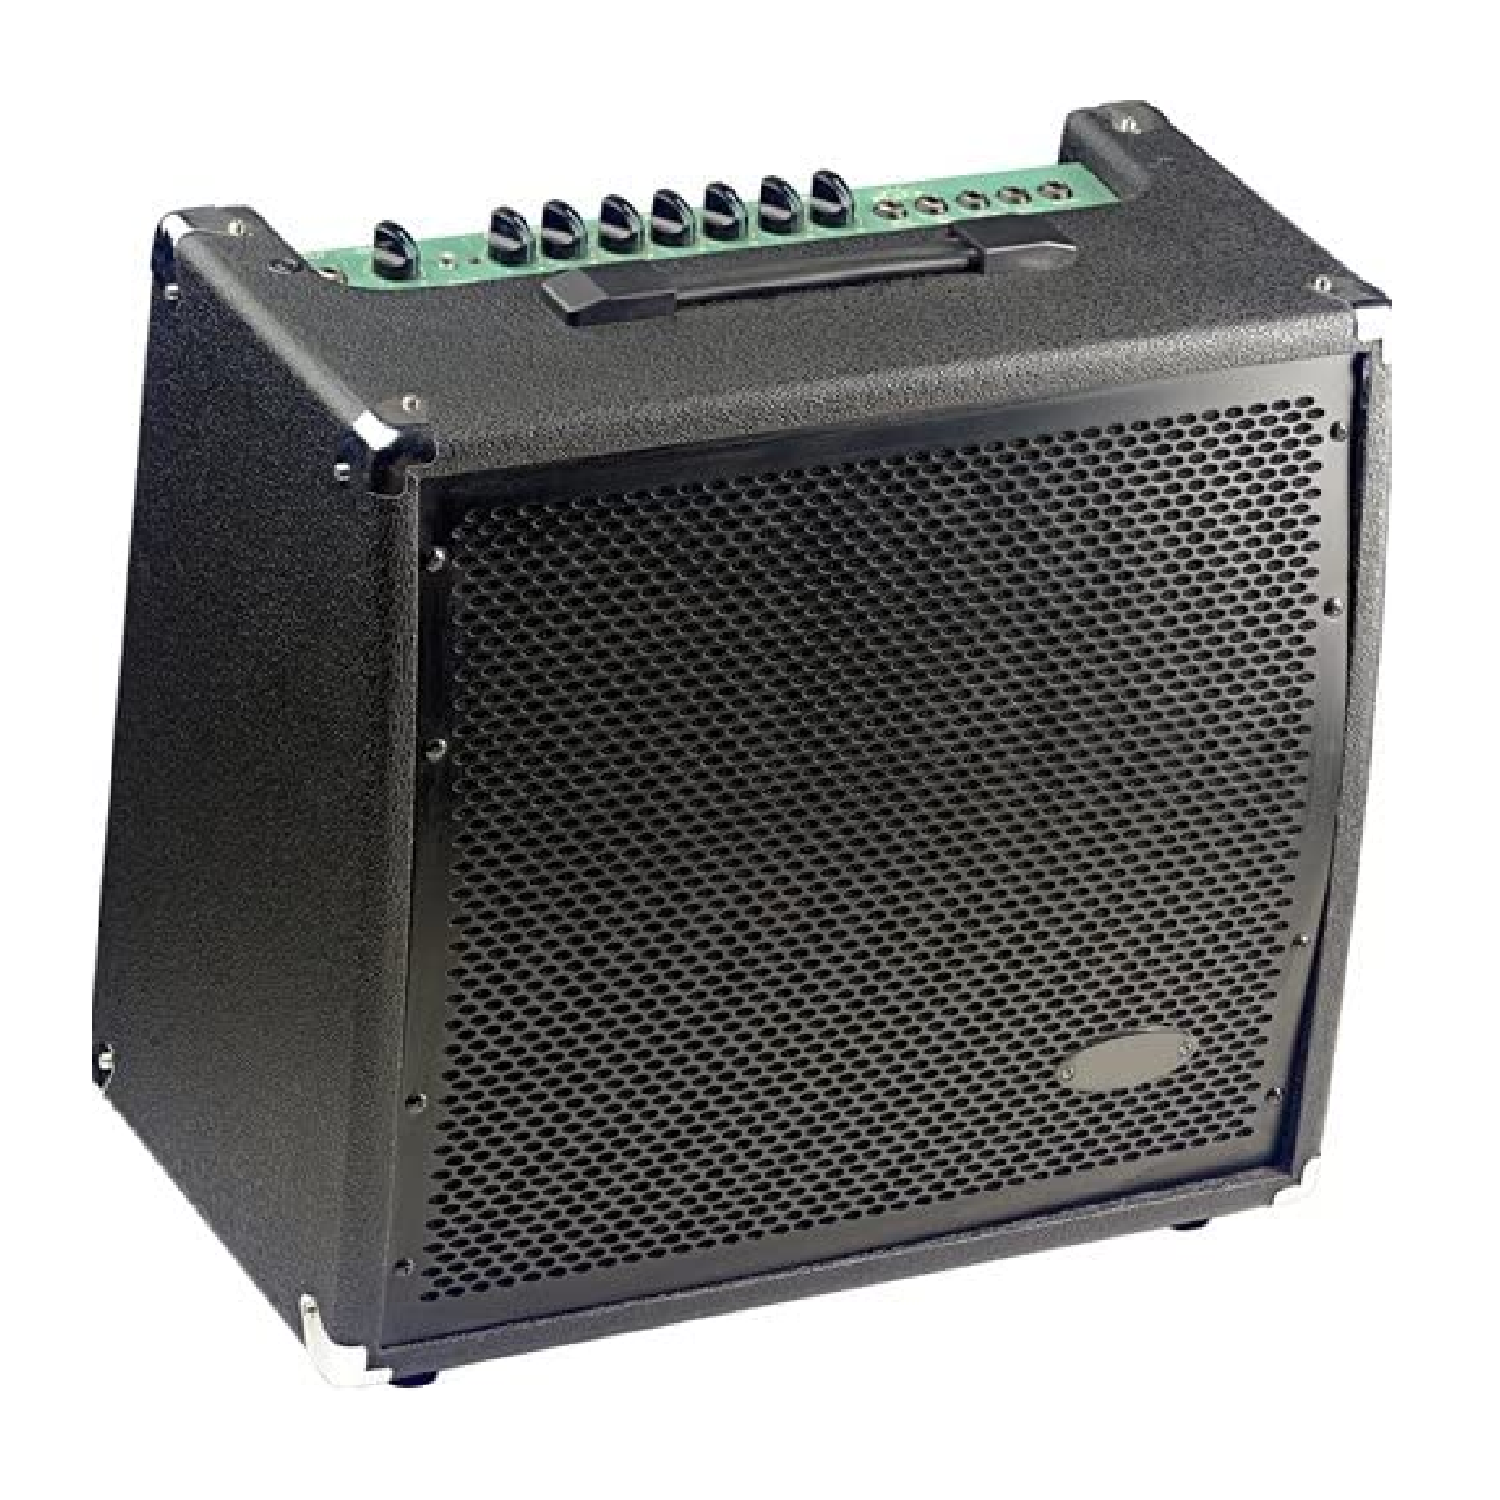 60 Watts Guitar Amplifier with Spring Reverb 1 x 12 Inches Speaker 2 Channels 3 Band EQ (Bass/Middle/Treble)   GA60 stagg music